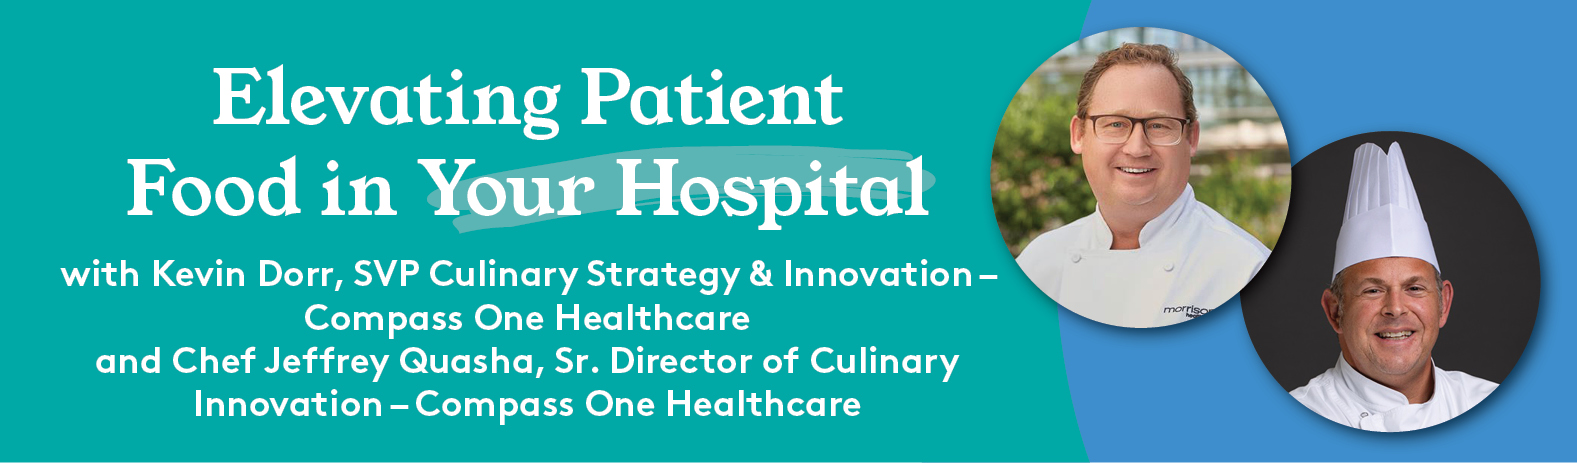 Elevating Patient Food in Your Hospital